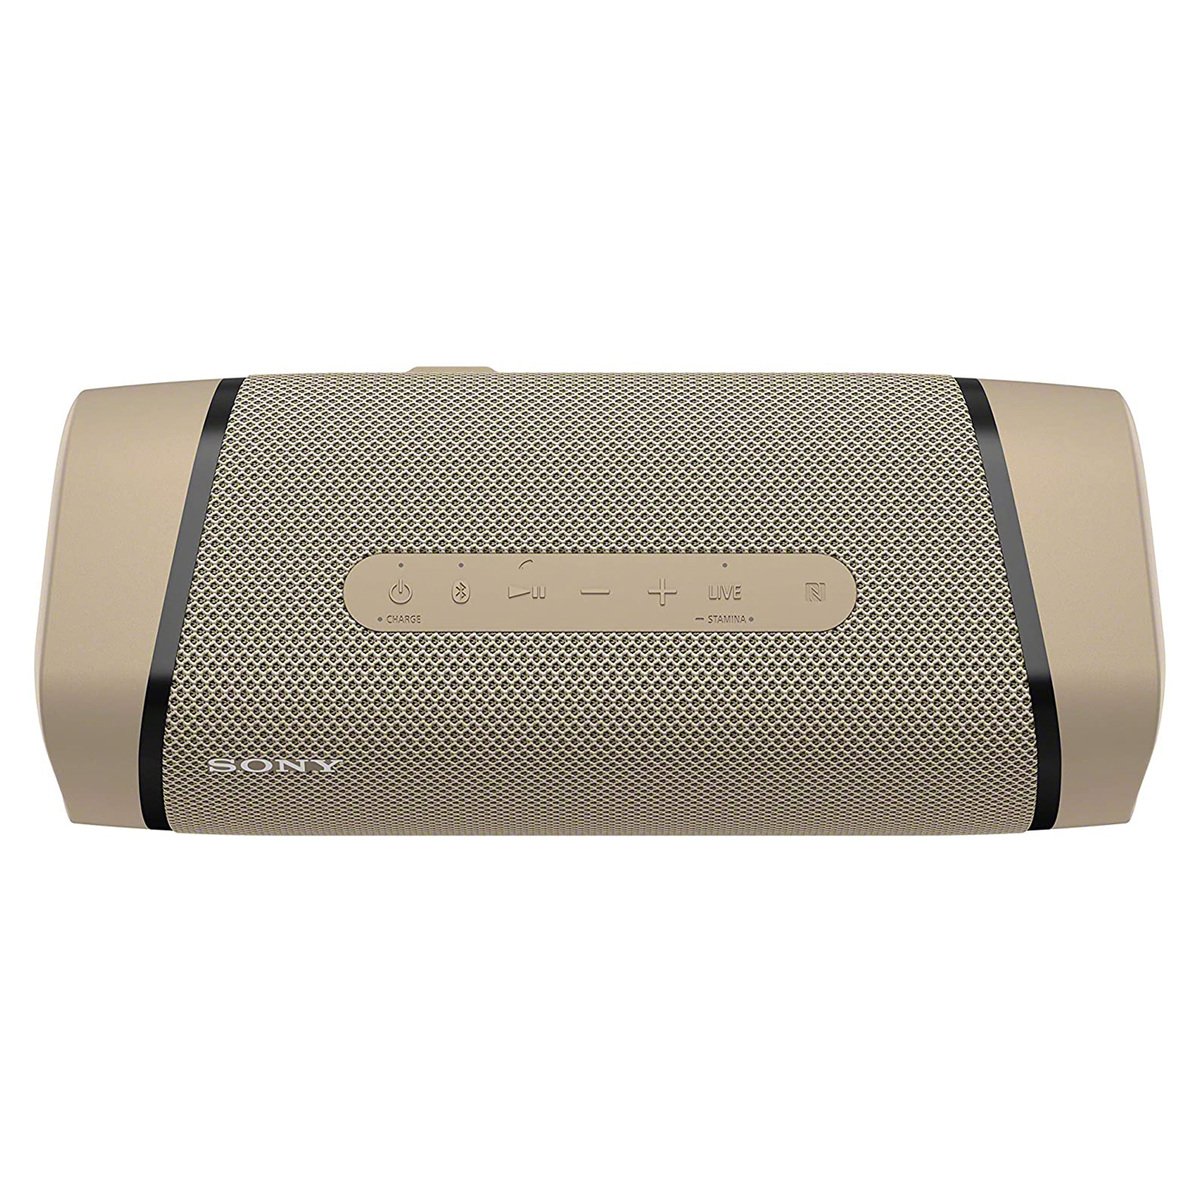 Sony SRS-XB33 EXTRA BASS Wireless Portable Speaker IP67 Waterproof Bluetooth and Built In Mic for Phone Calls,Cream